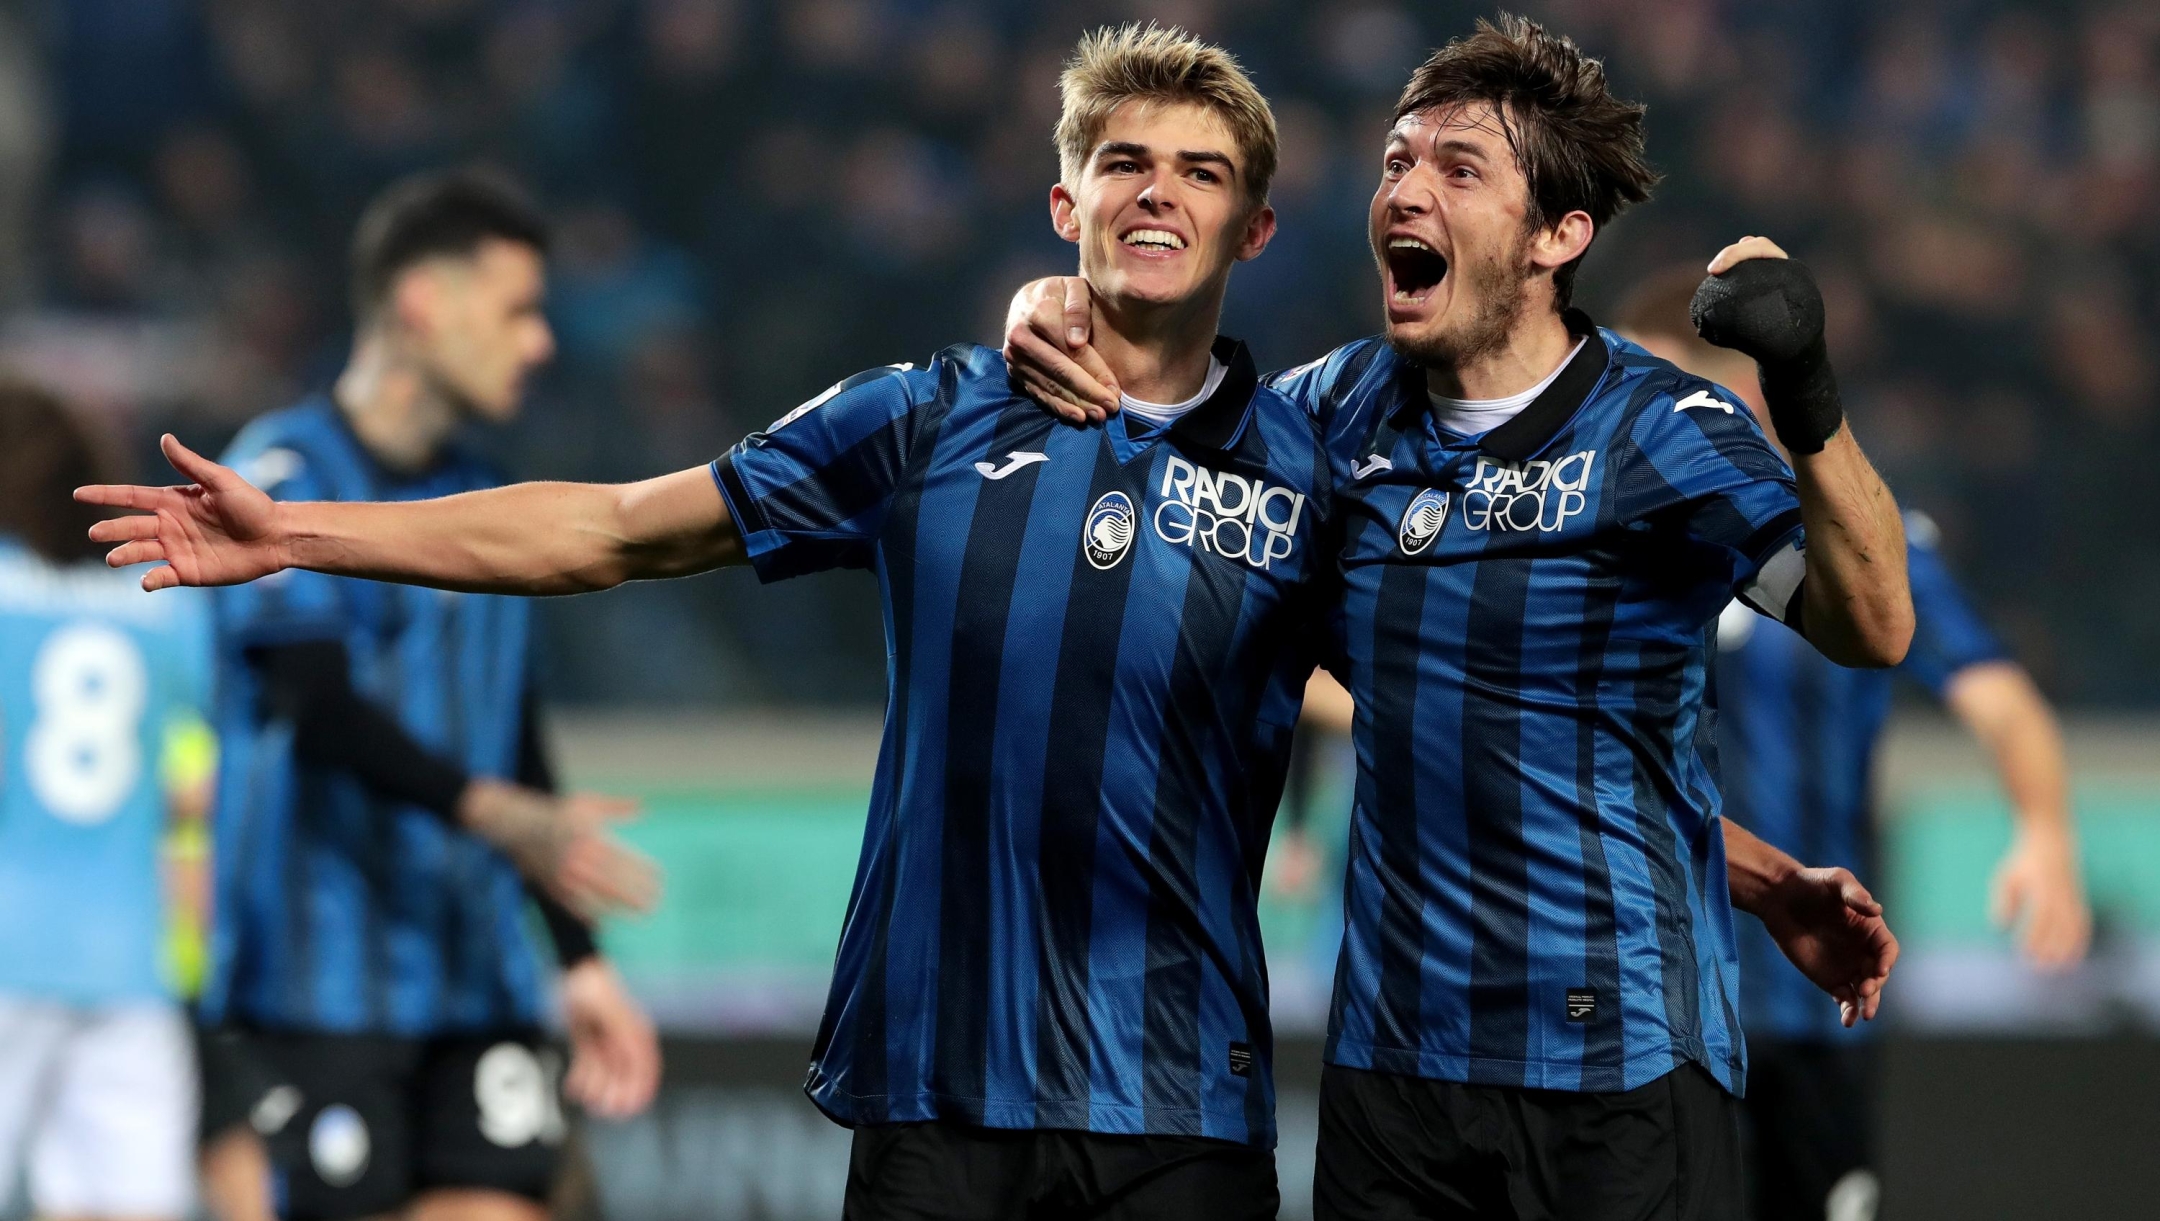 BERGAMO, ITALY - FEBRUARY 04: Charles De Ketelaere of Atalanta BC celebrates with Marten de Roon of Atalanta BC after scoring his team's third goal during the Serie A TIM match between Atalanta BC and SS Lazio at Gewiss Stadium on February 04, 2024 in Bergamo, Italy. (Photo by Emilio Andreoli/Getty Images)